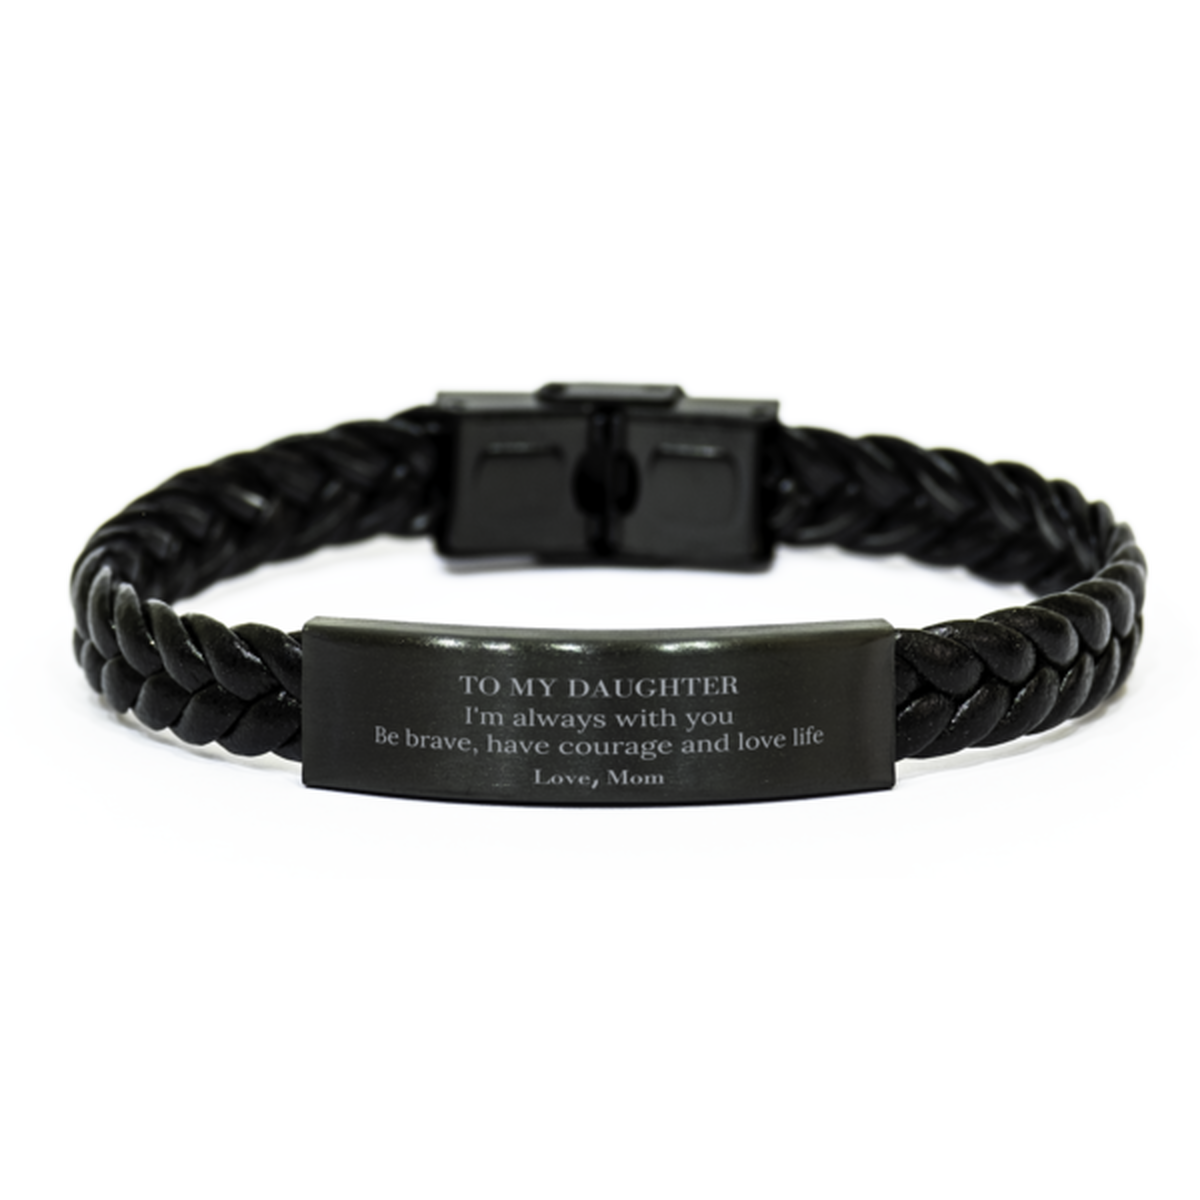 To My Daughter Gifts from Mom, Unique Braided Leather Bracelet Inspirational Christmas Birthday Graduation Gifts for Daughter I'm always with you. Be brave, have courage and love life. Love, Mom